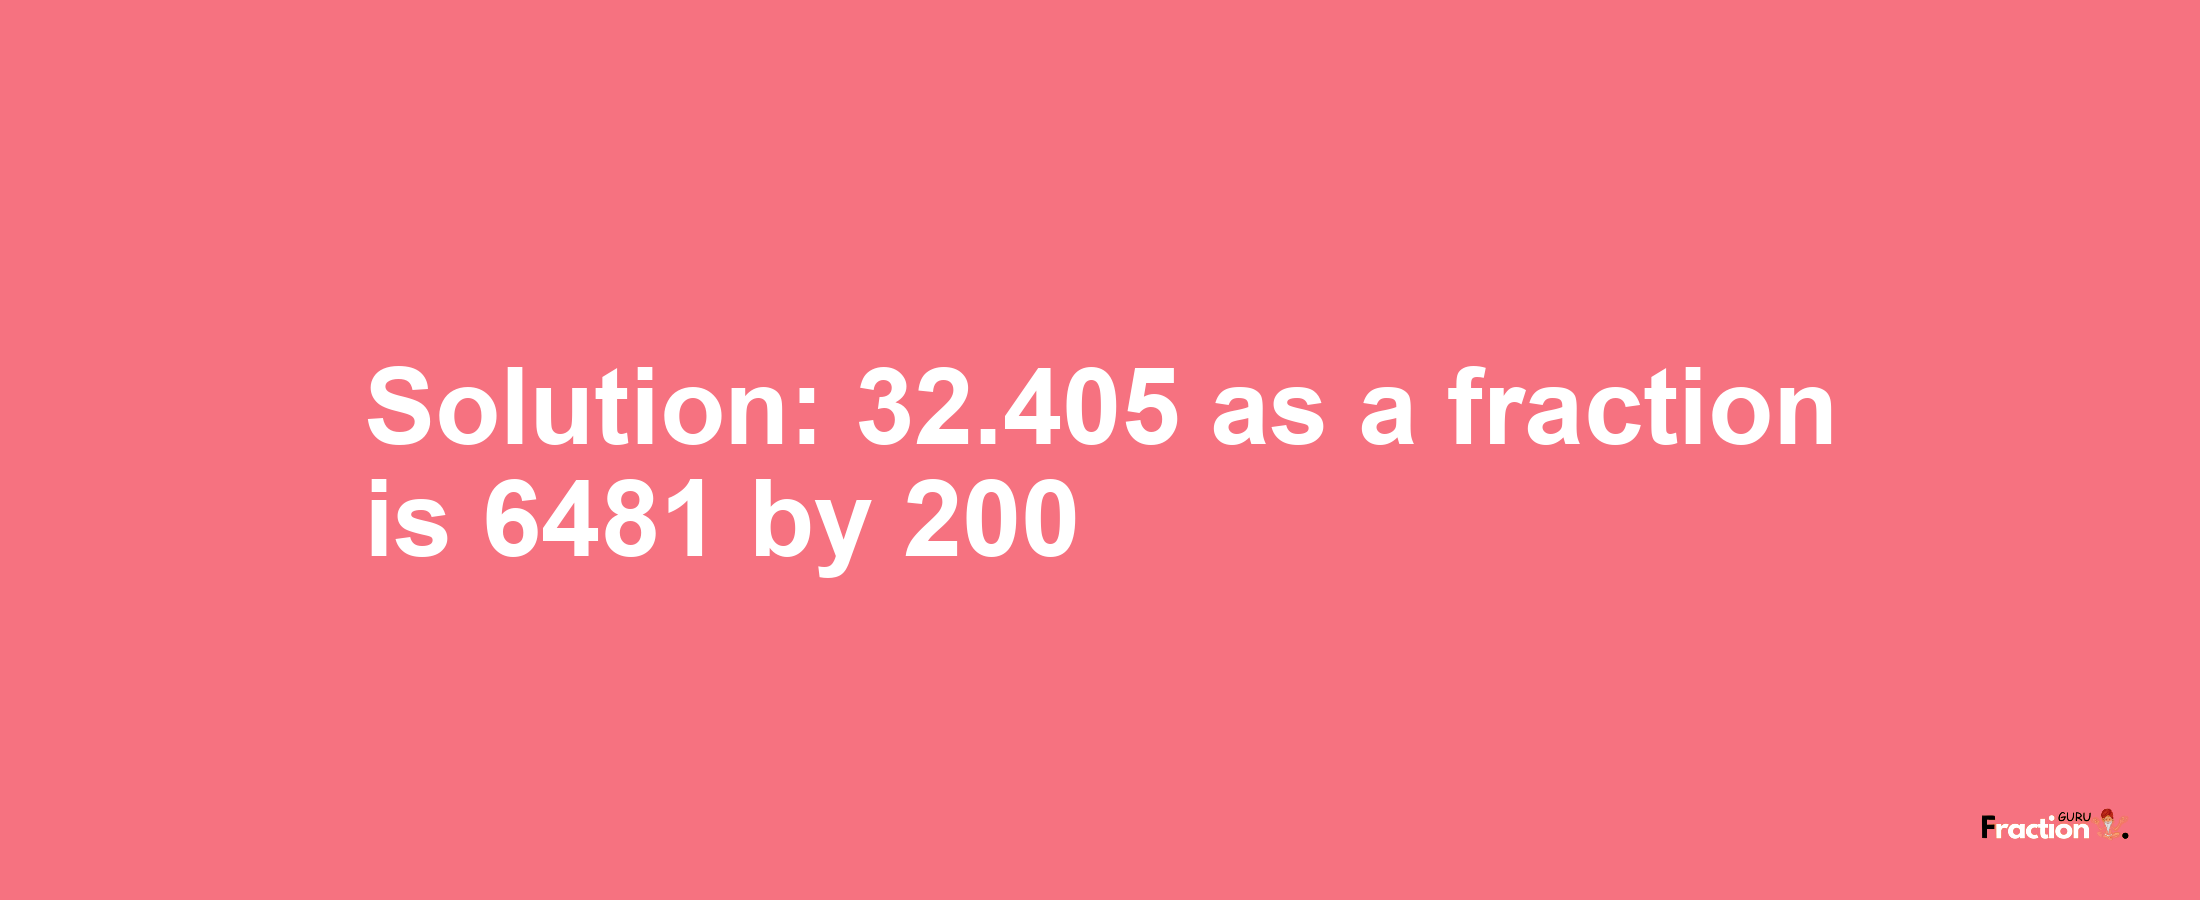 Solution:32.405 as a fraction is 6481/200